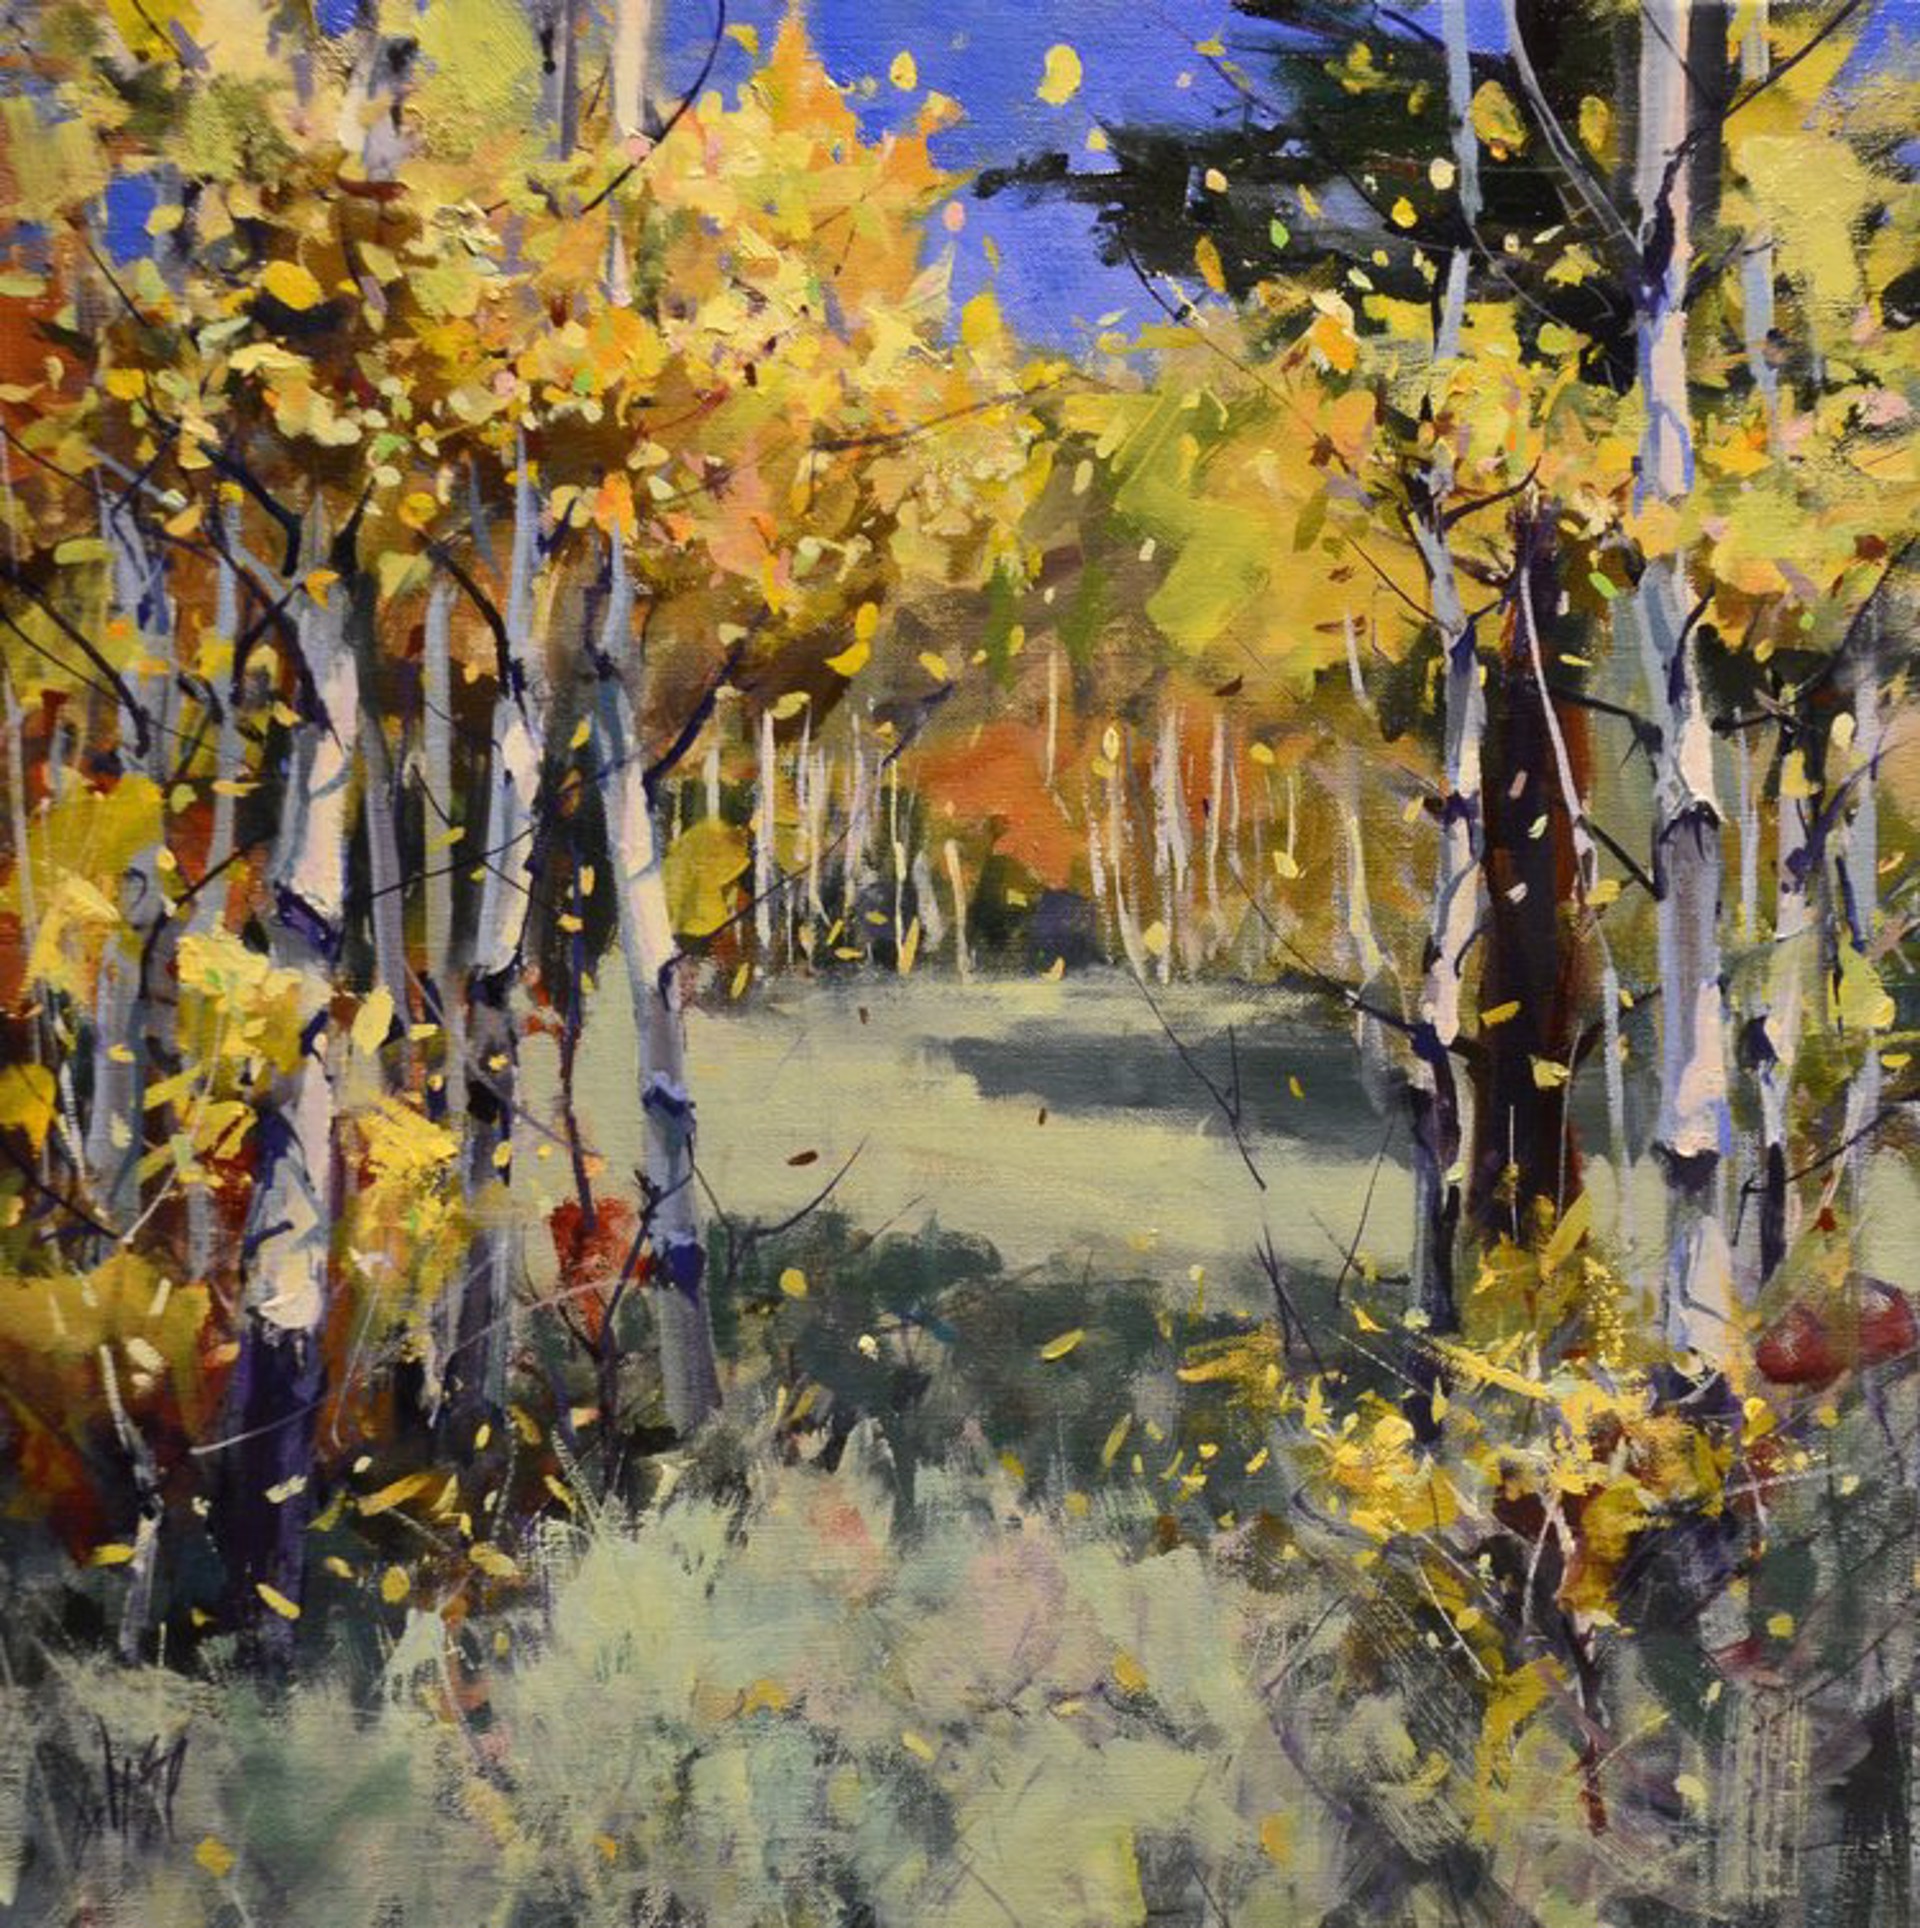 Into the Aspens by Mike Wise